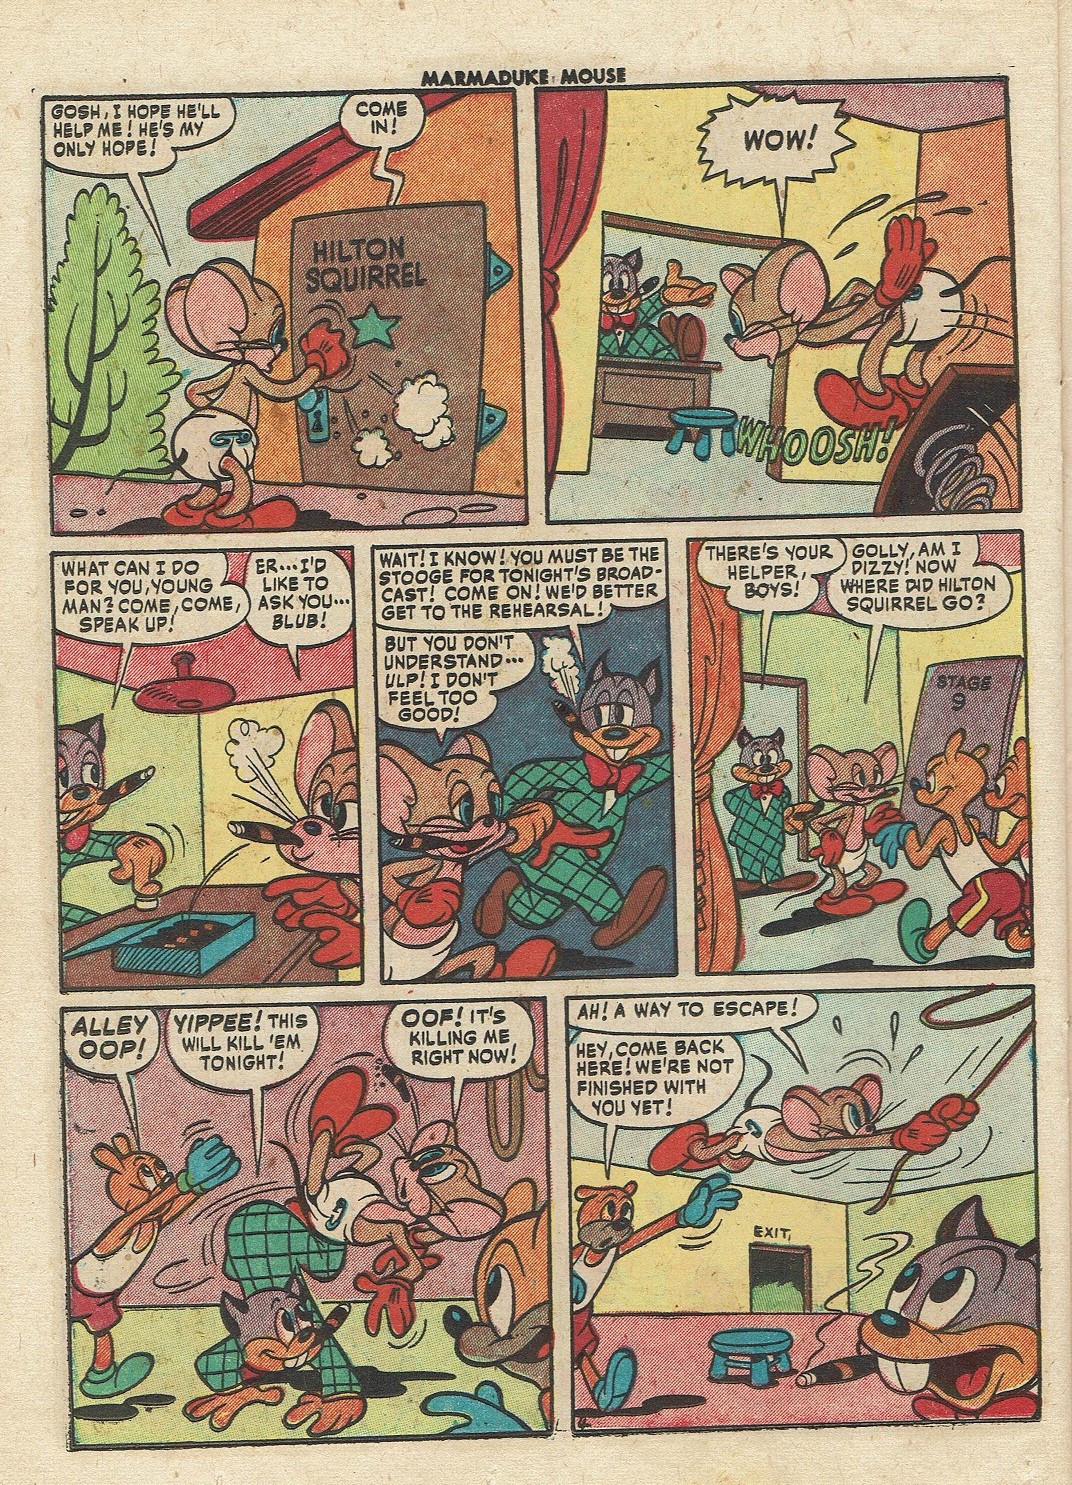 Read online Marmaduke Mouse comic -  Issue #29 - 22